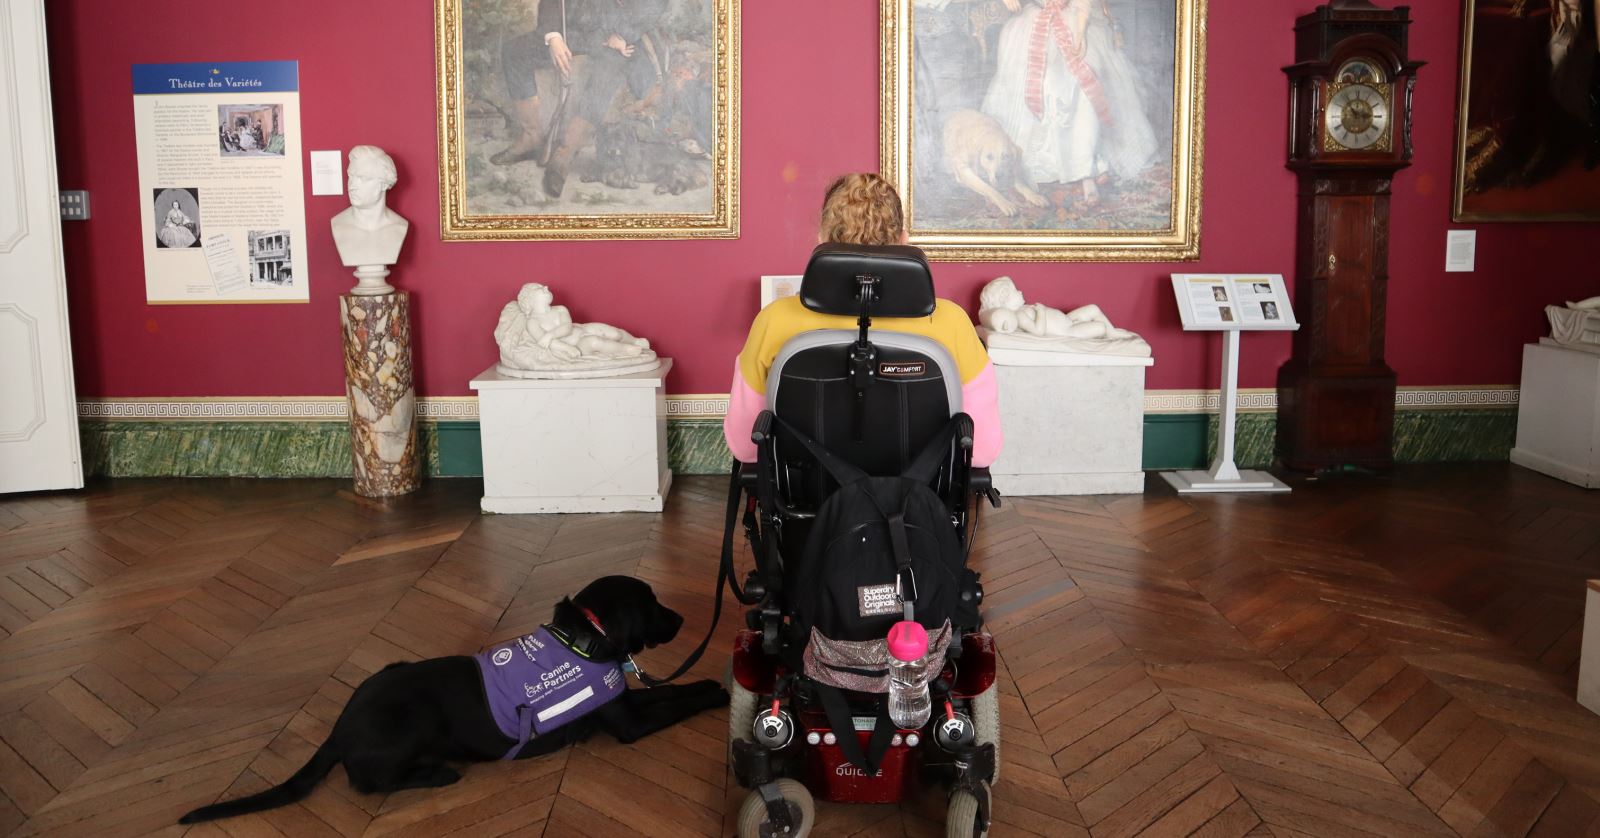 kate Stanforth sat in her wheelchair with support dog looking at paintings within The Bowes Museum